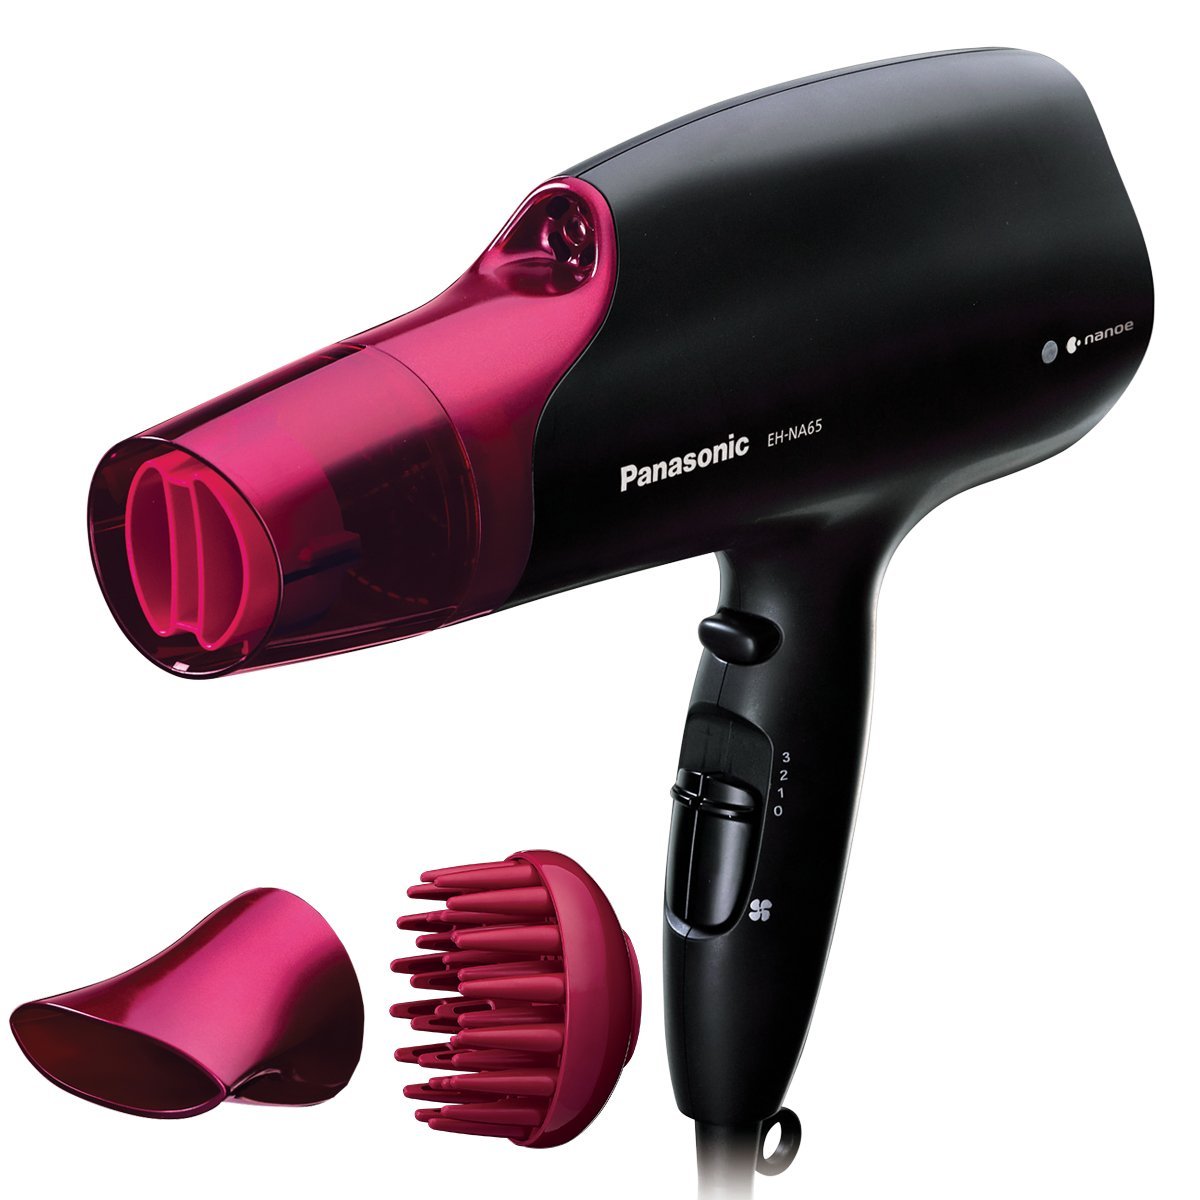 Panasonic Hair Dryer with Nanoe Technology and 3 attachments including